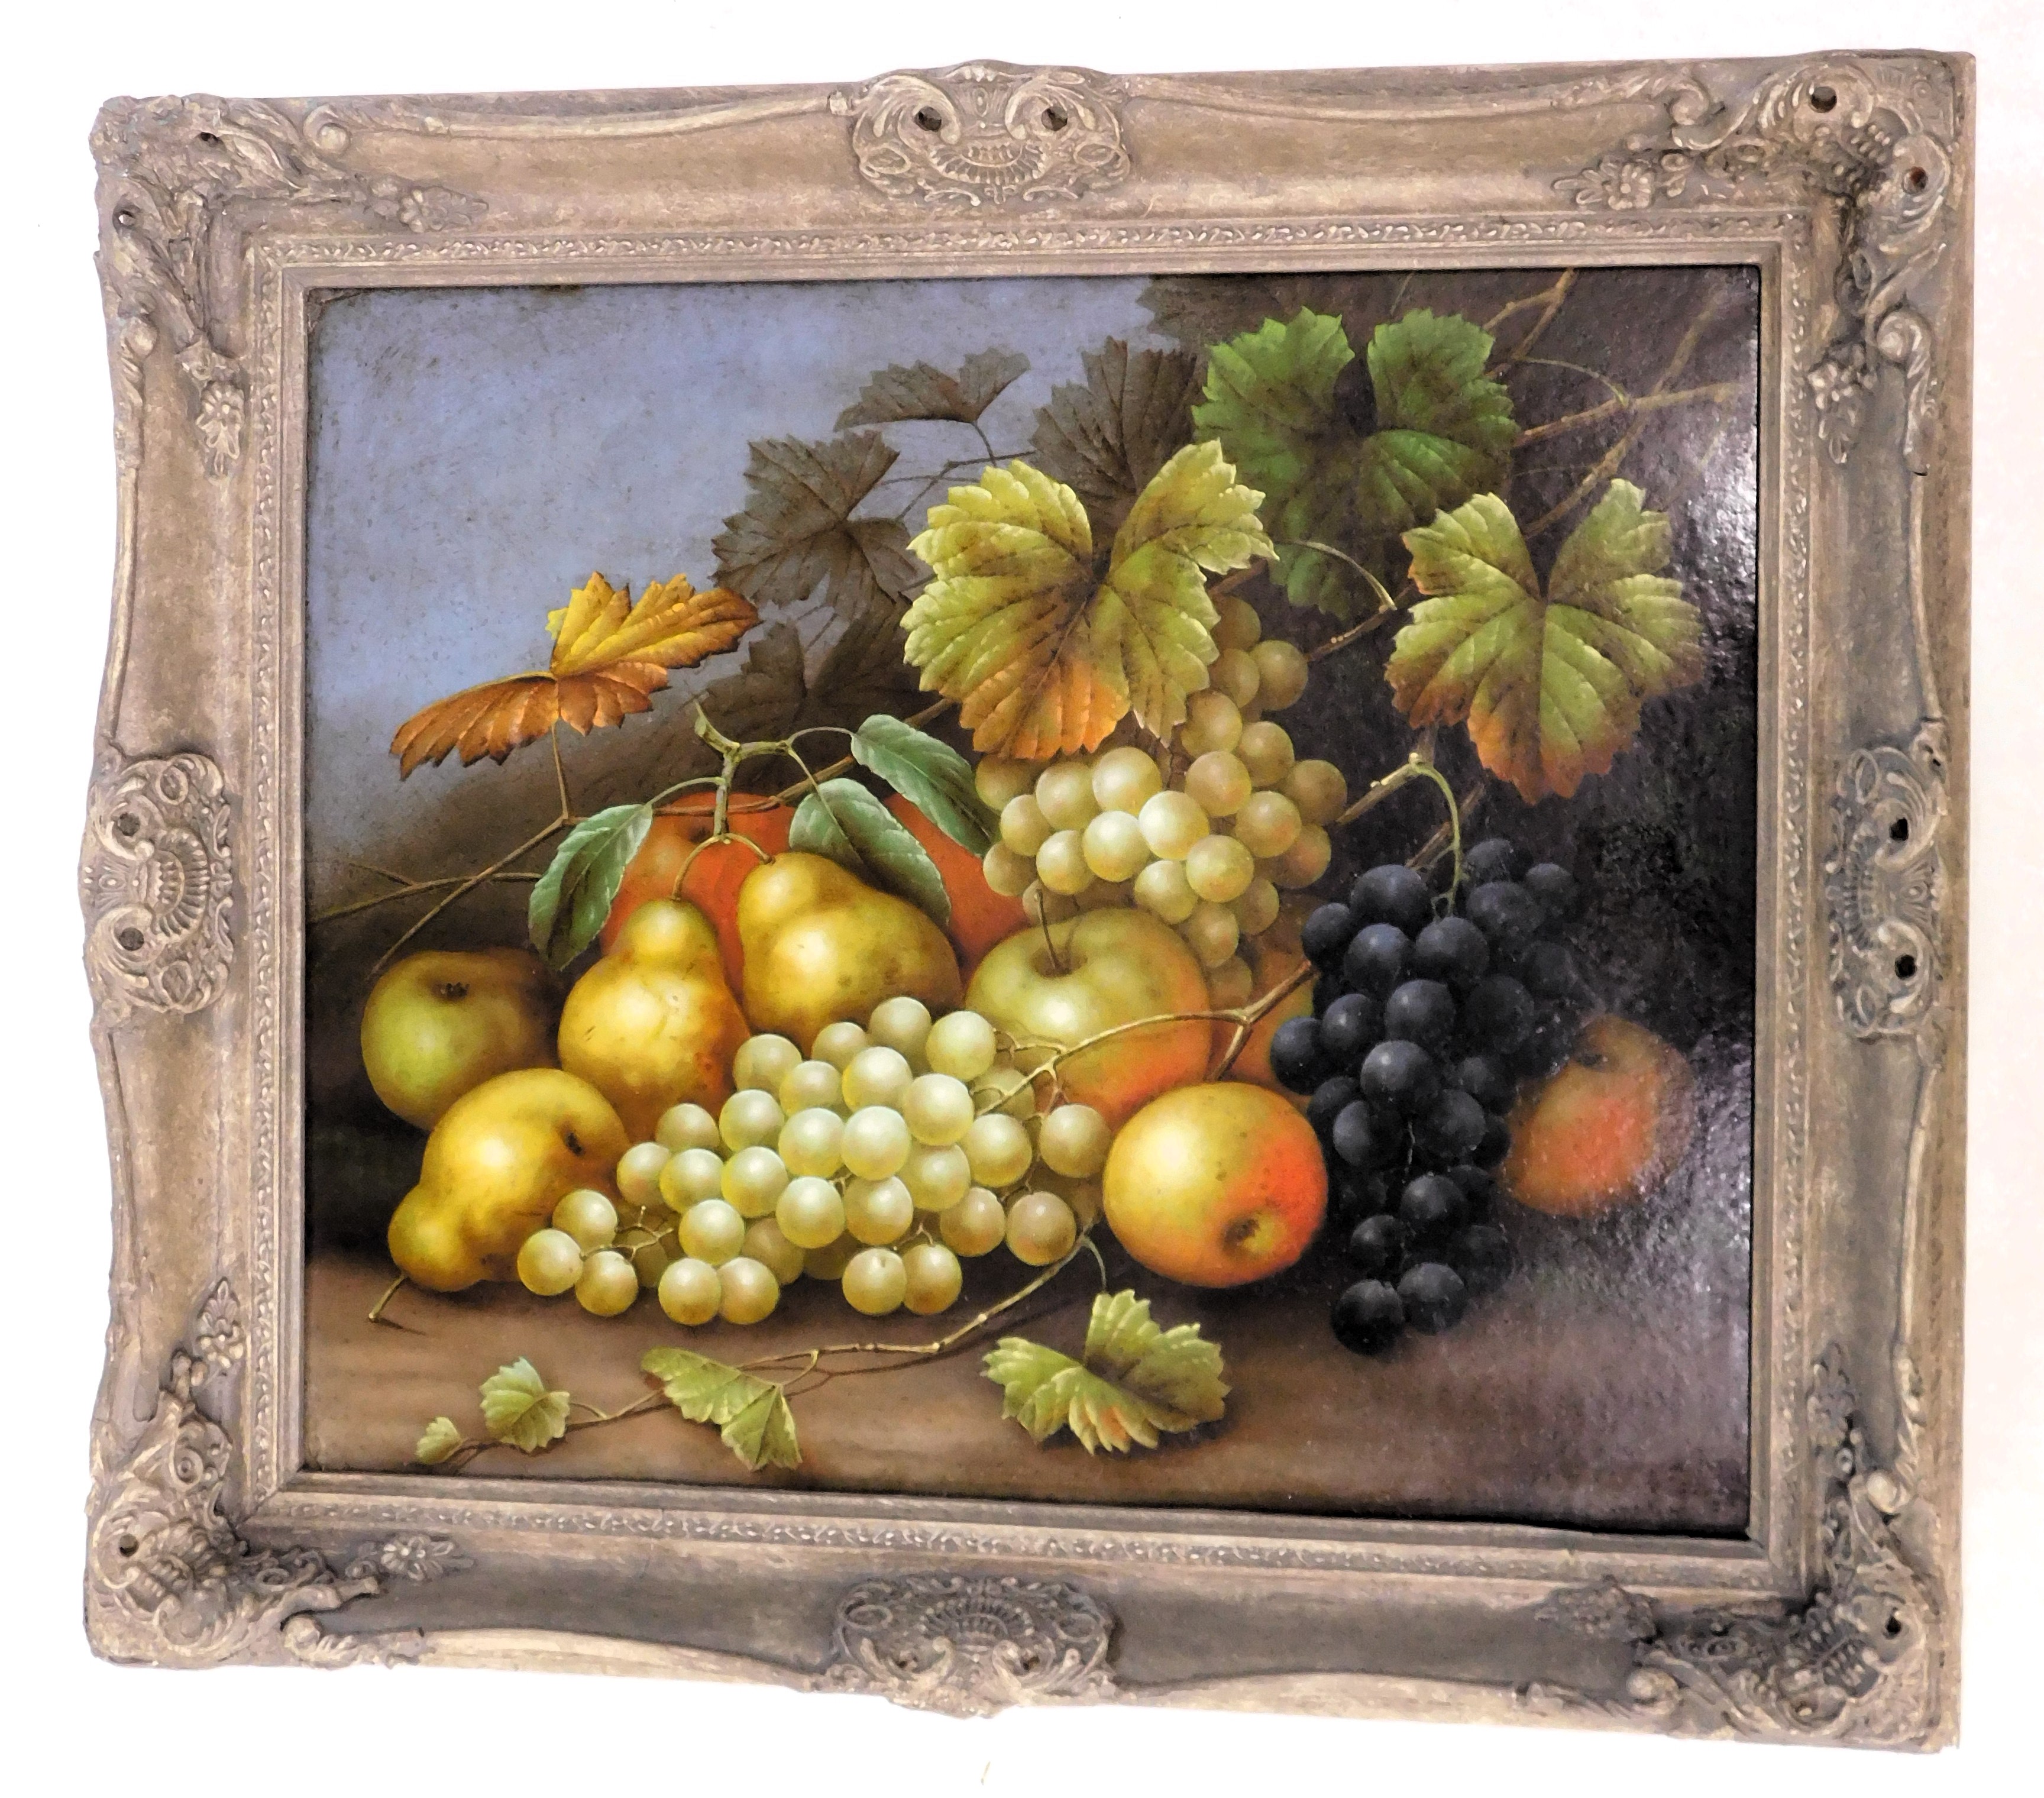 Edwin Steele (c.1850 - c.1912). Fruit still life, oil on board, signed and dated 1910, 50cm x 60cm. - Image 2 of 4